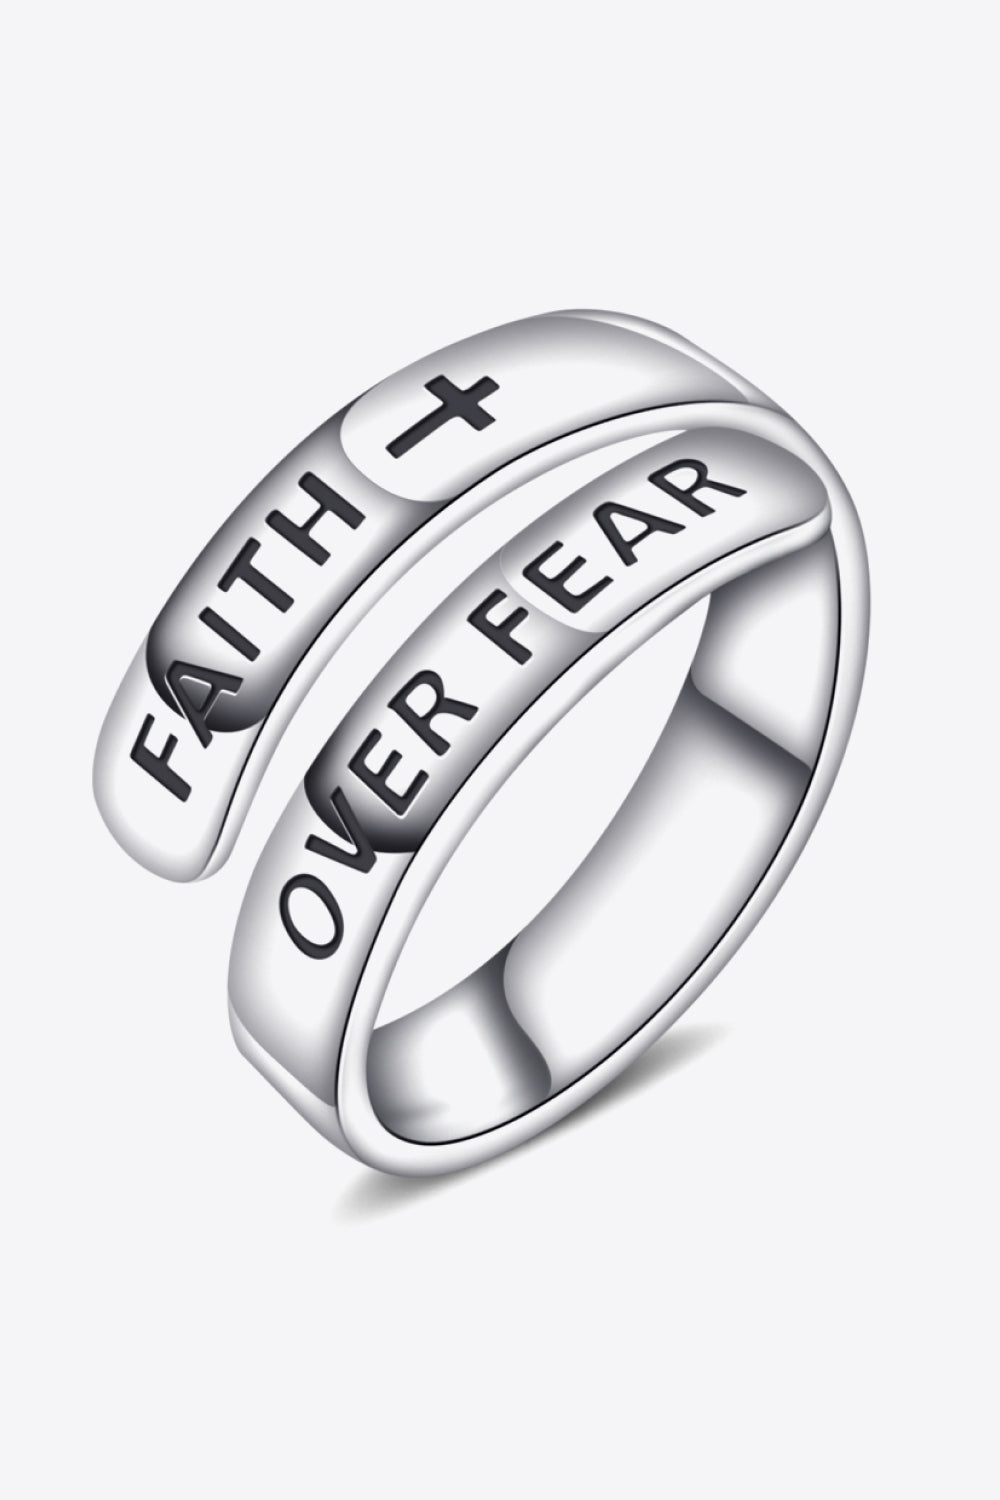 Women’s 925 Sterling Silver FAITH OVER FEAR Bypass Ring